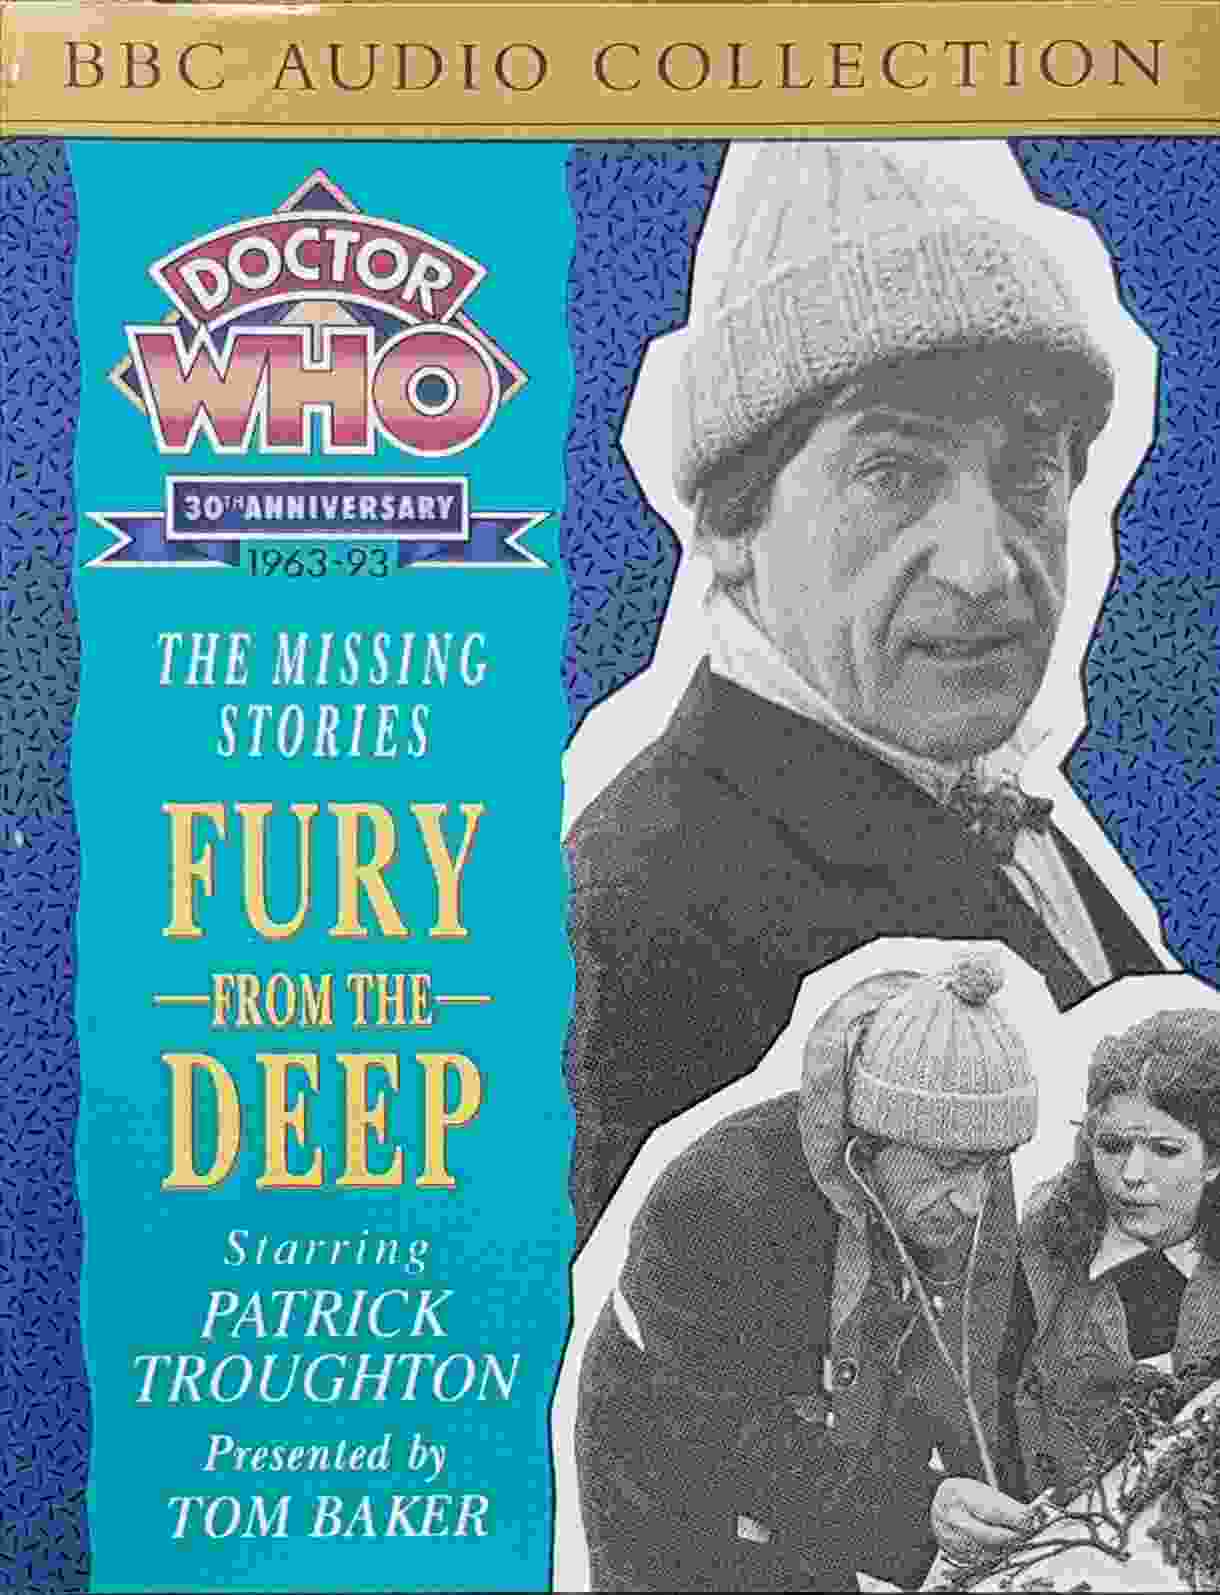 Picture of ZBBC 1434 Doctor Who - Fury from the deep by artist Victor Pemberton from the BBC records and Tapes library